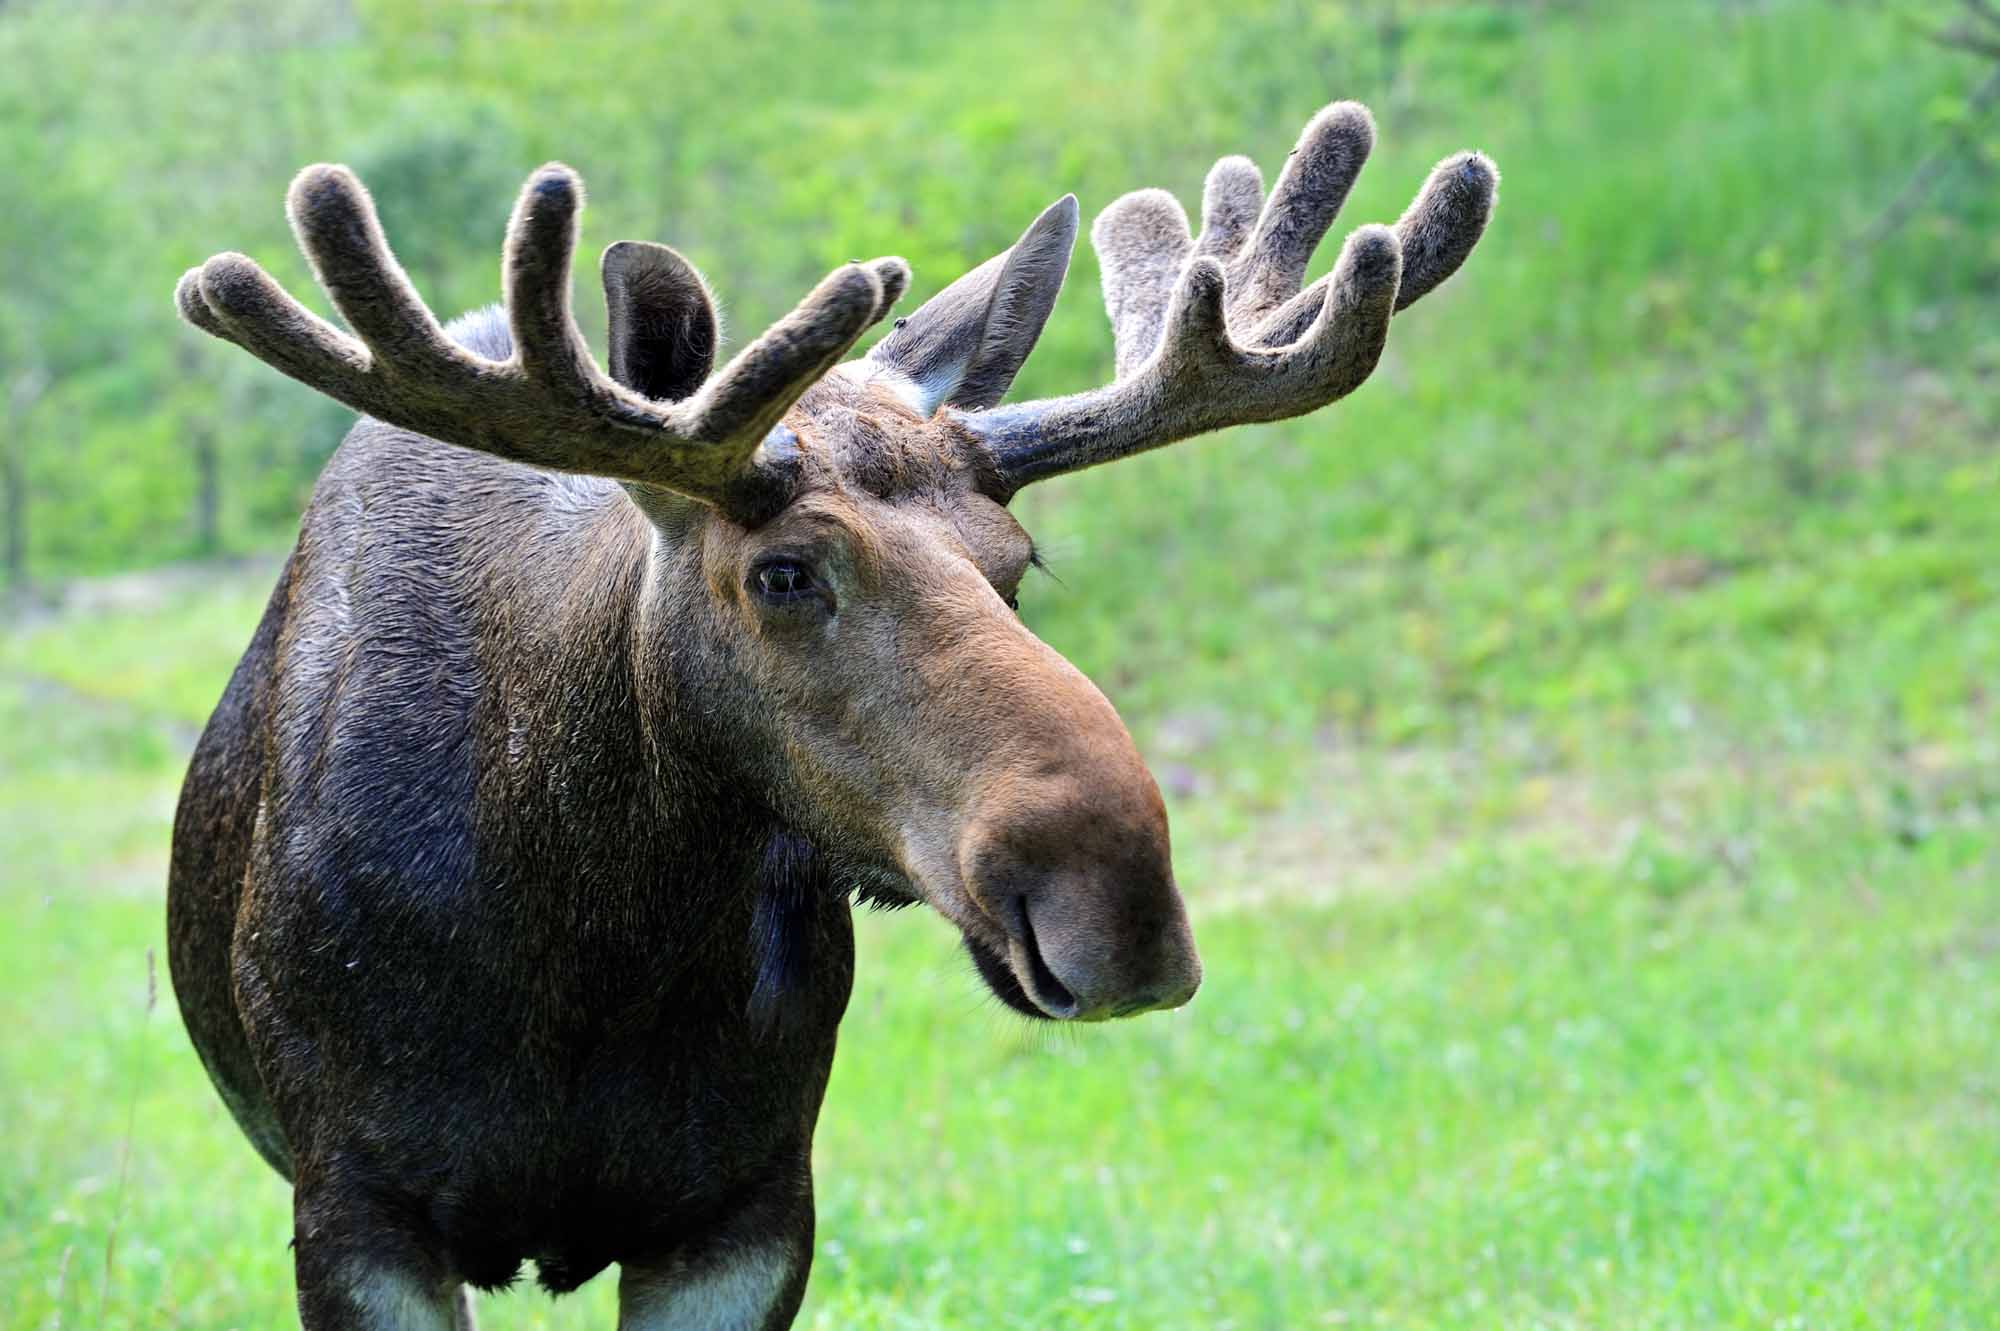 in-search-of-algonquin-moose-a-canadian-wildlife-safari